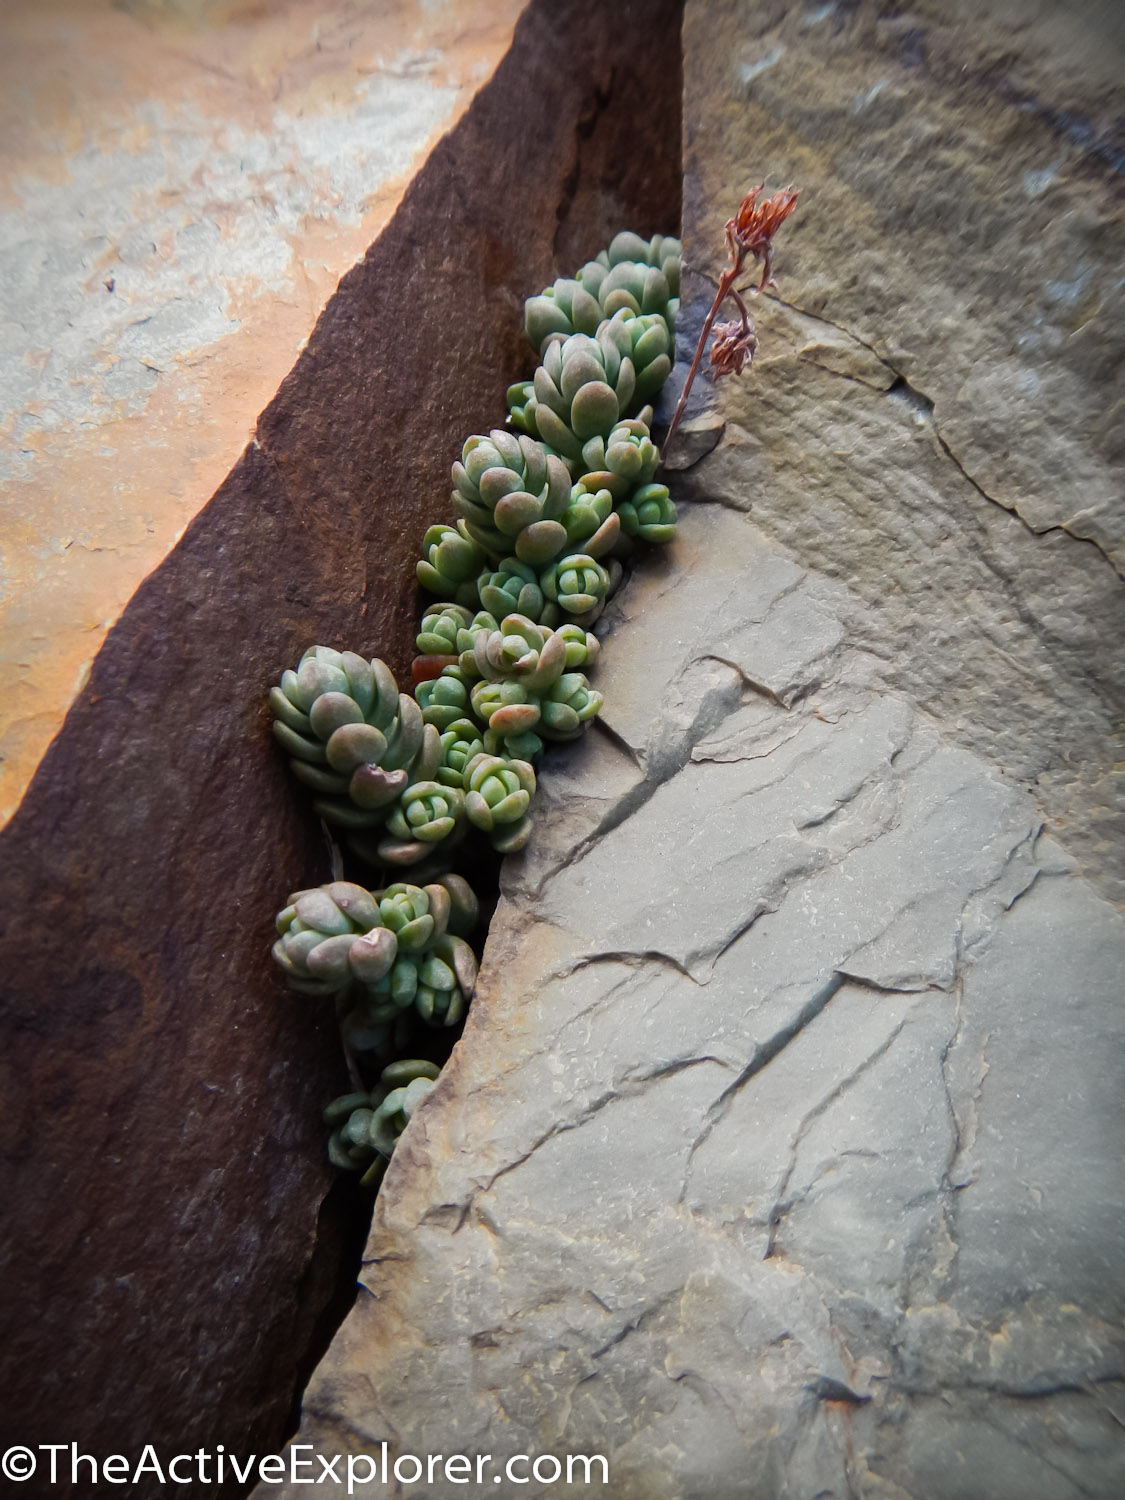 These tiny succulents fight for their place in the rocks at 8,900 feet.